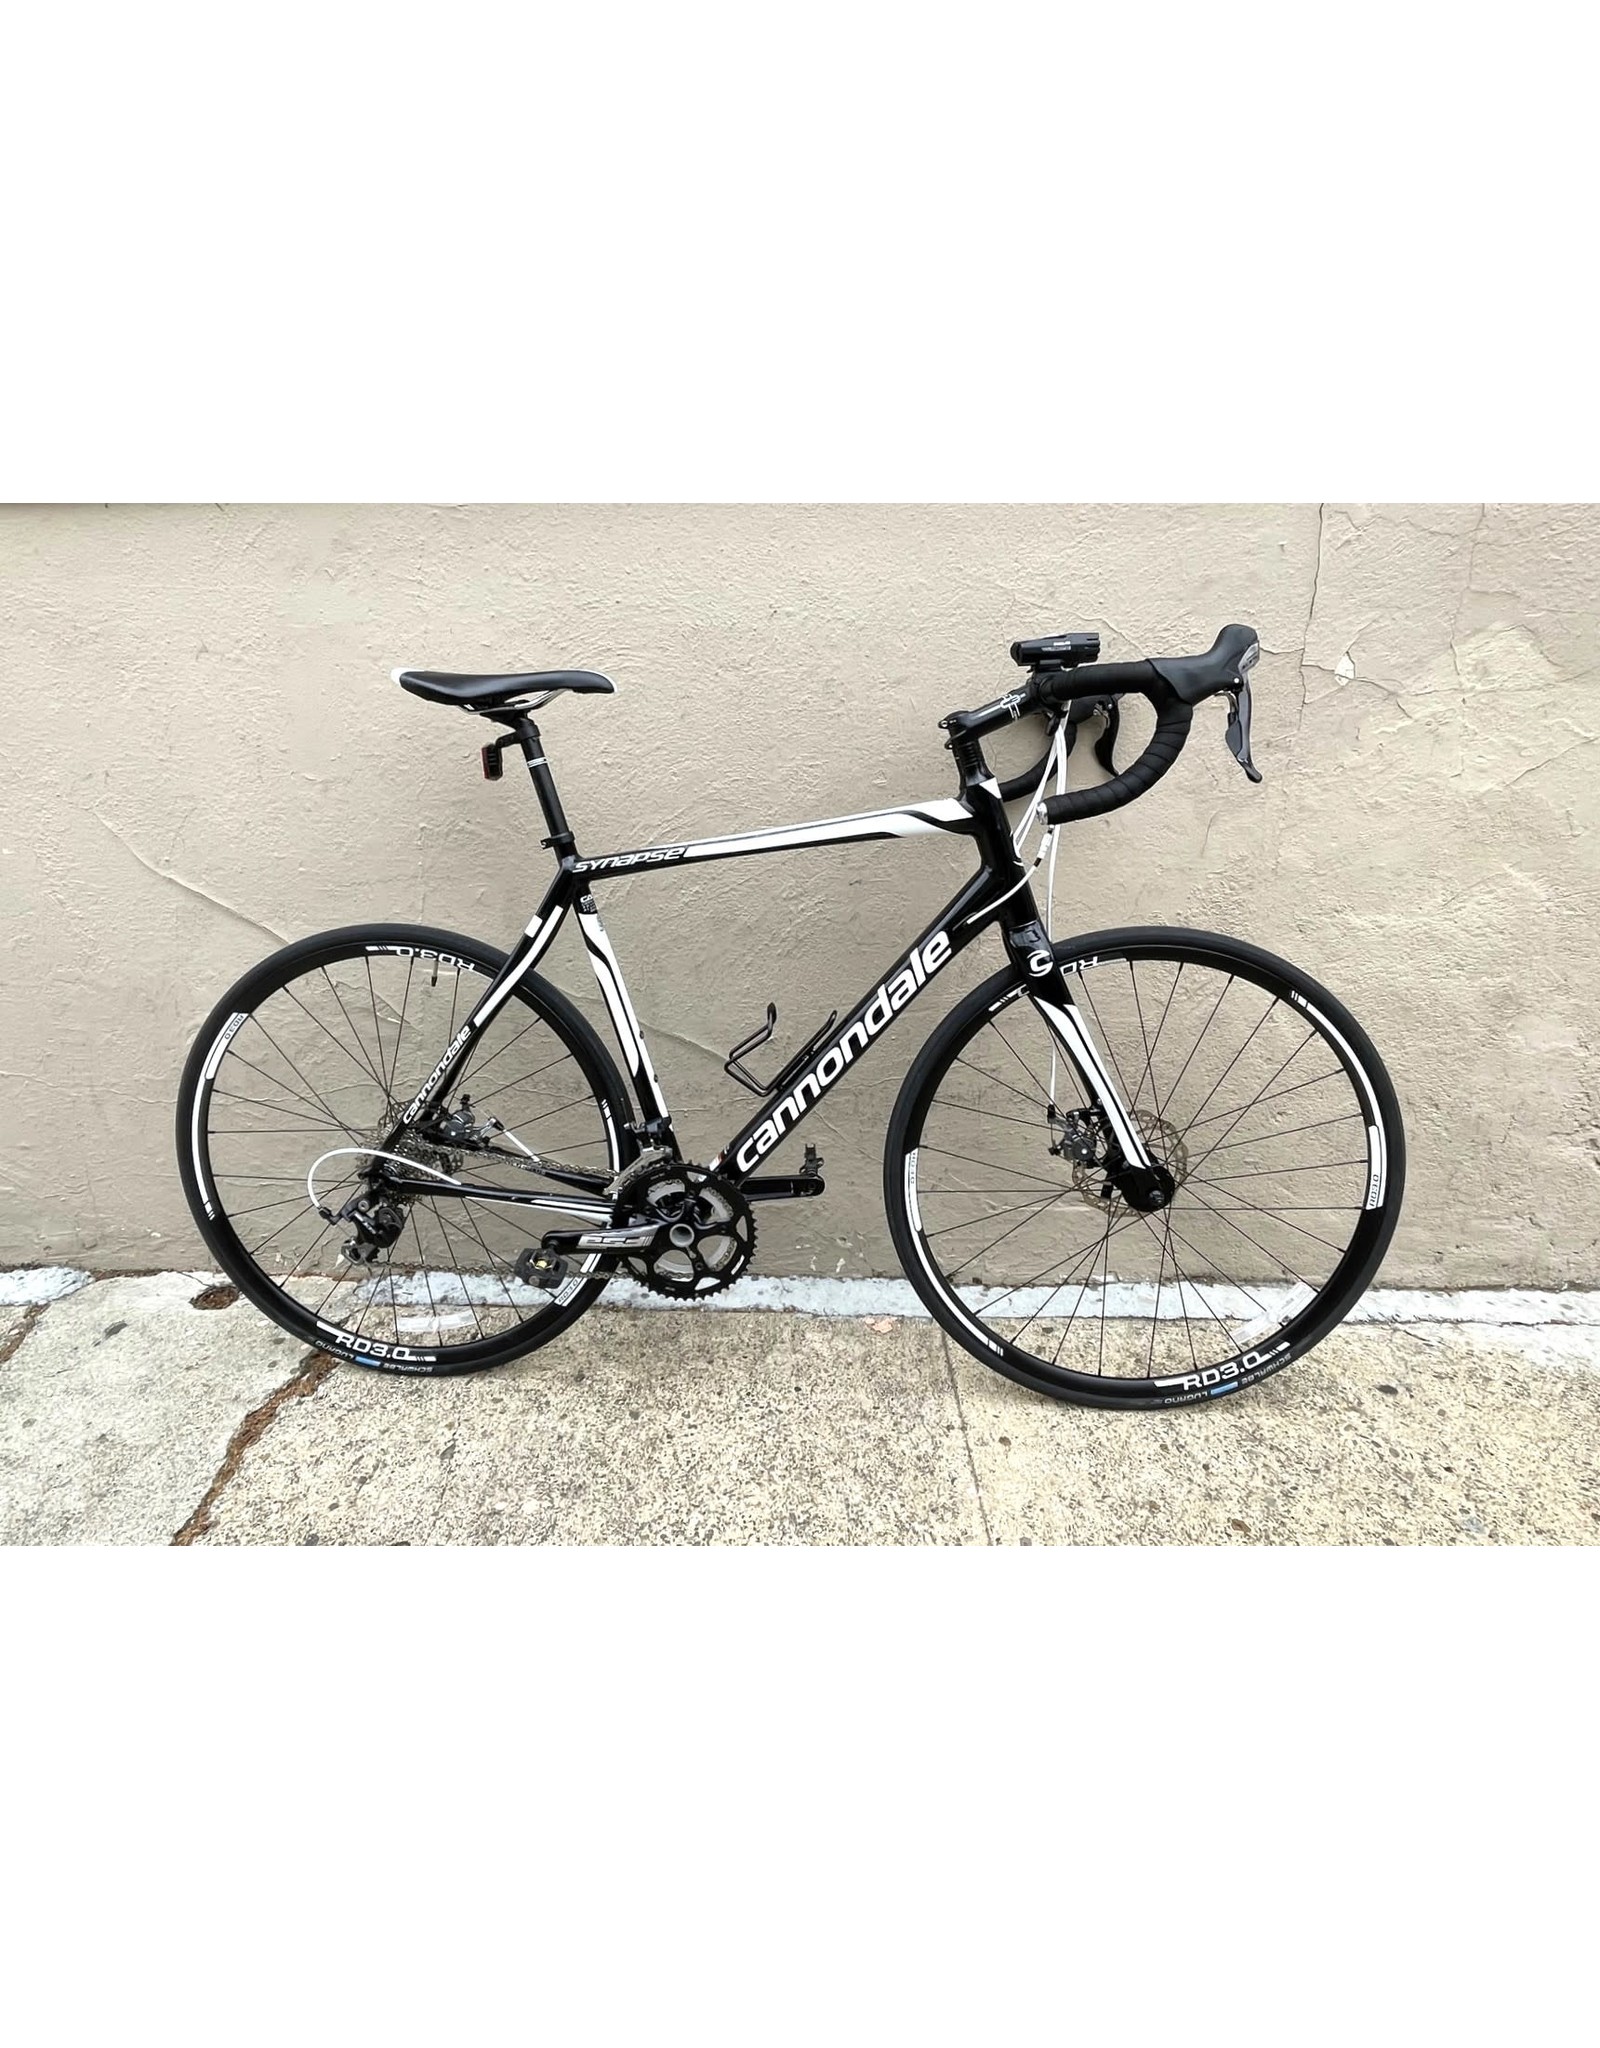 Cannondale Cannondale Synapse, 22 Inches, 2017, Black